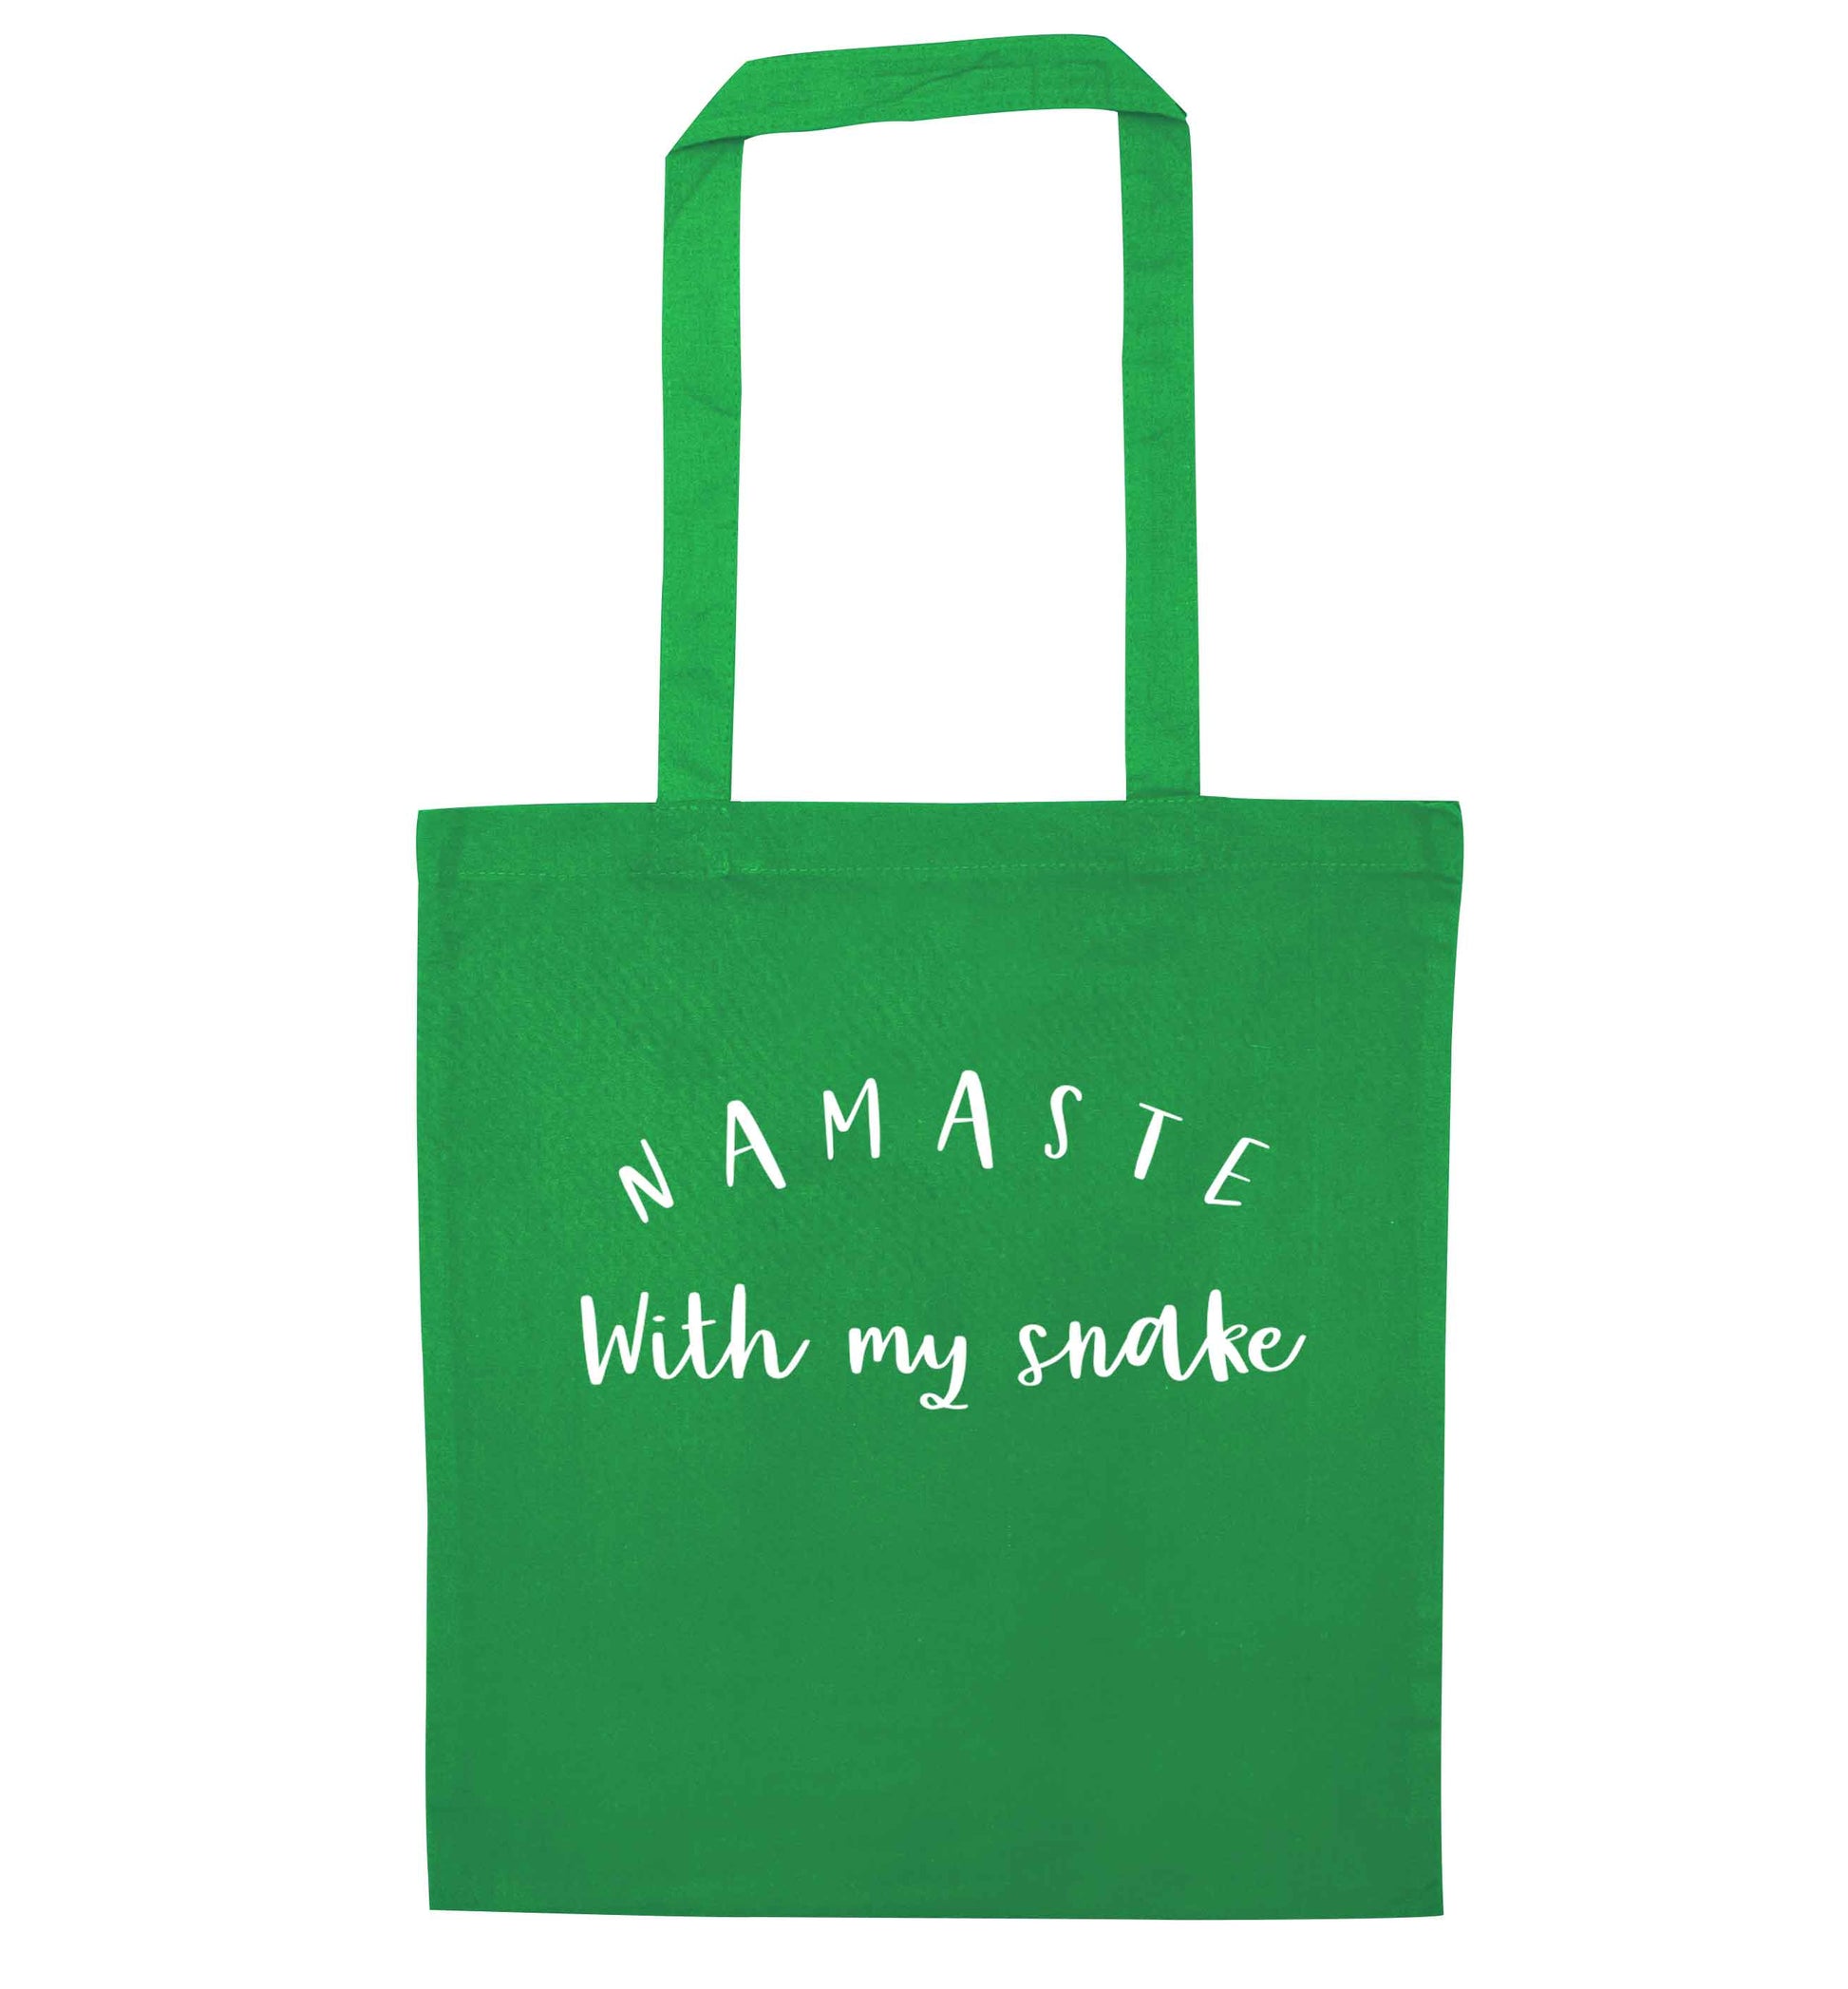 Namaste with my snake green tote bag